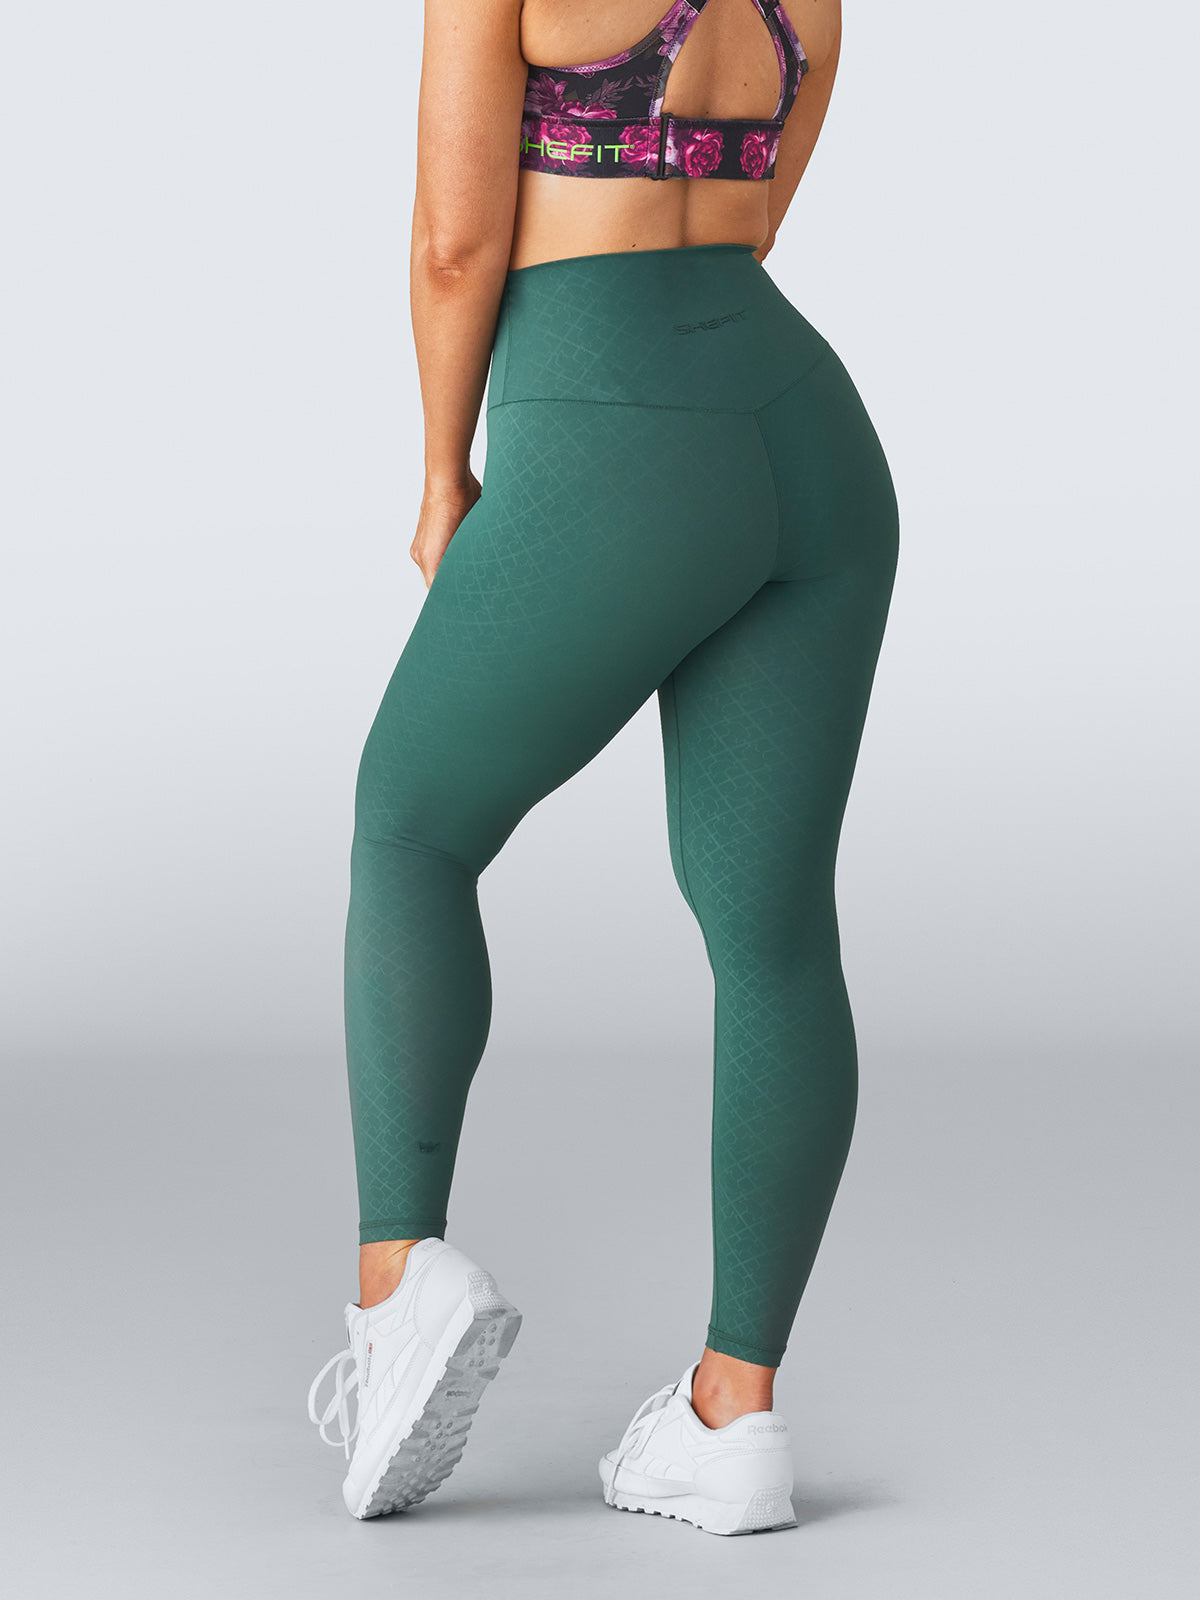 Shascullfites gym and shaping Sport Leggings High Waisted With